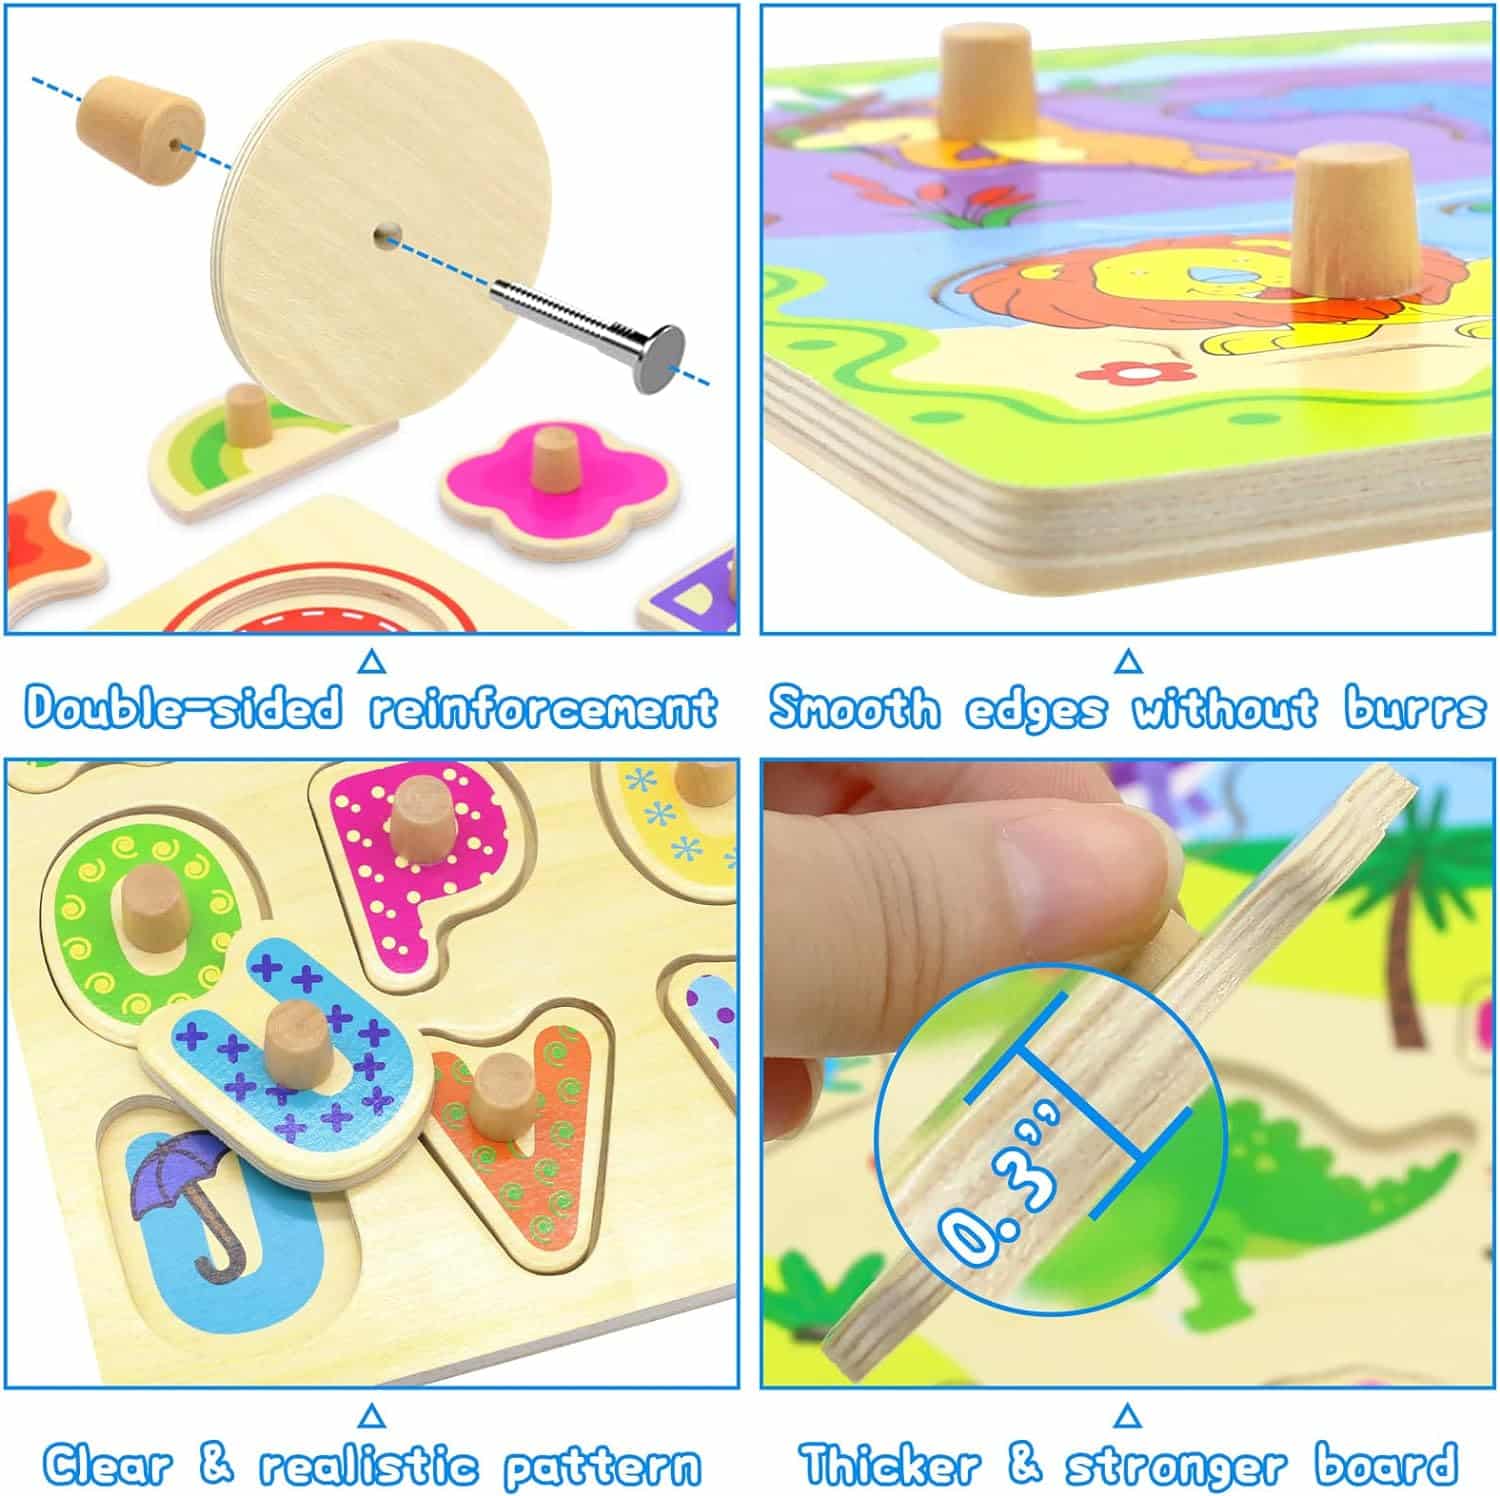 Wooden Puzzles for Toddlers: A Review of JOIWOD Educational Toys